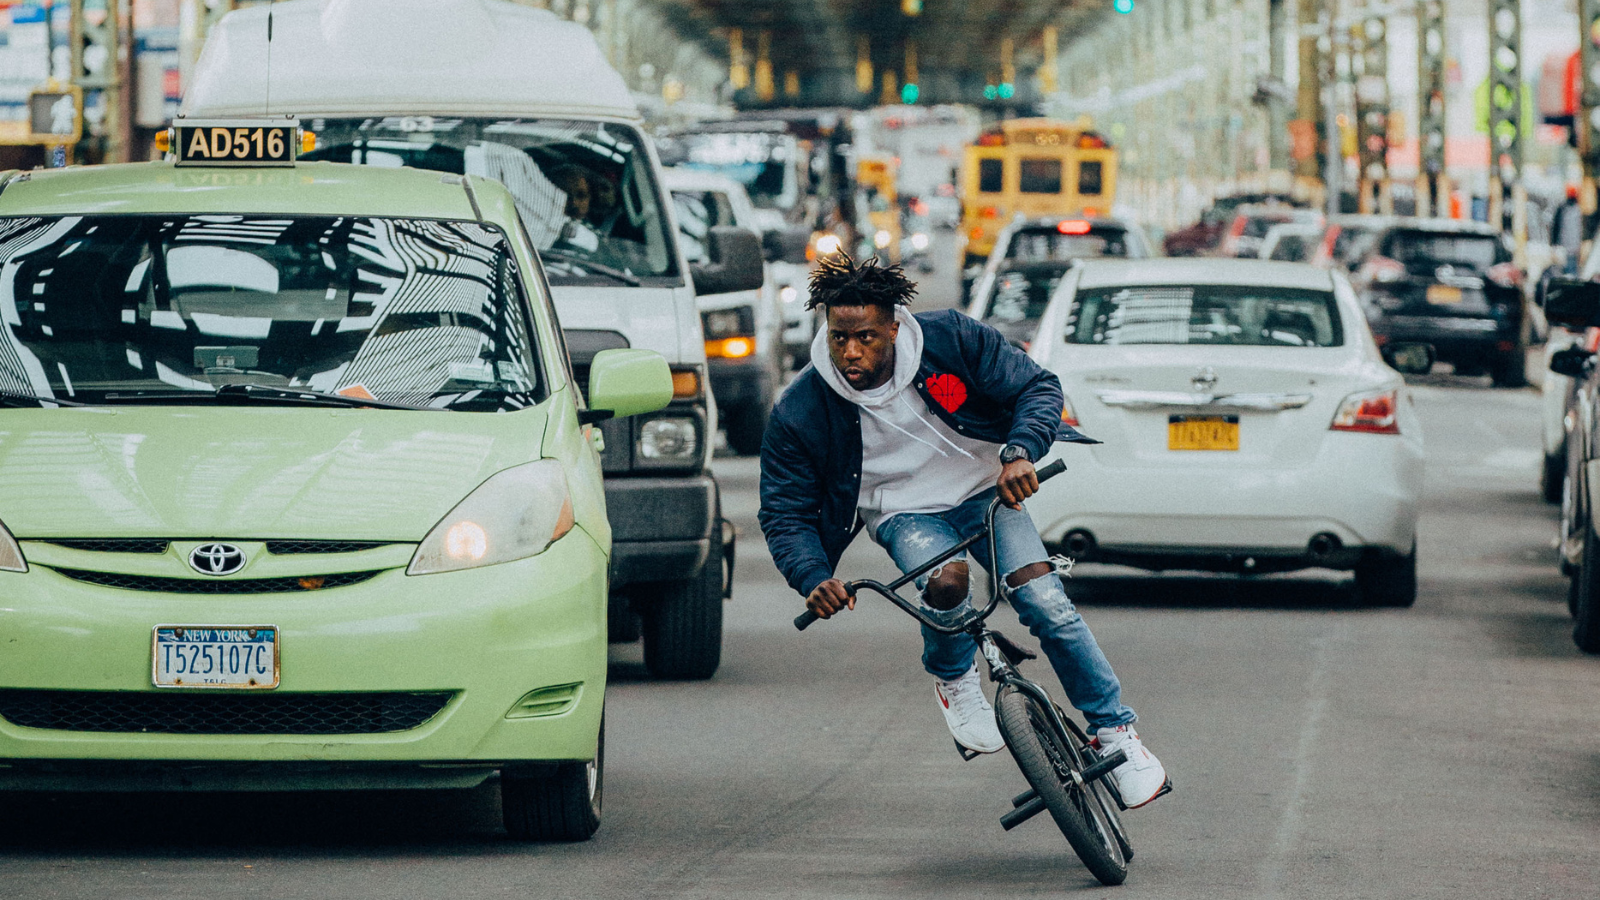 Would You Cop This LV Bike from Nigel Sylvester?